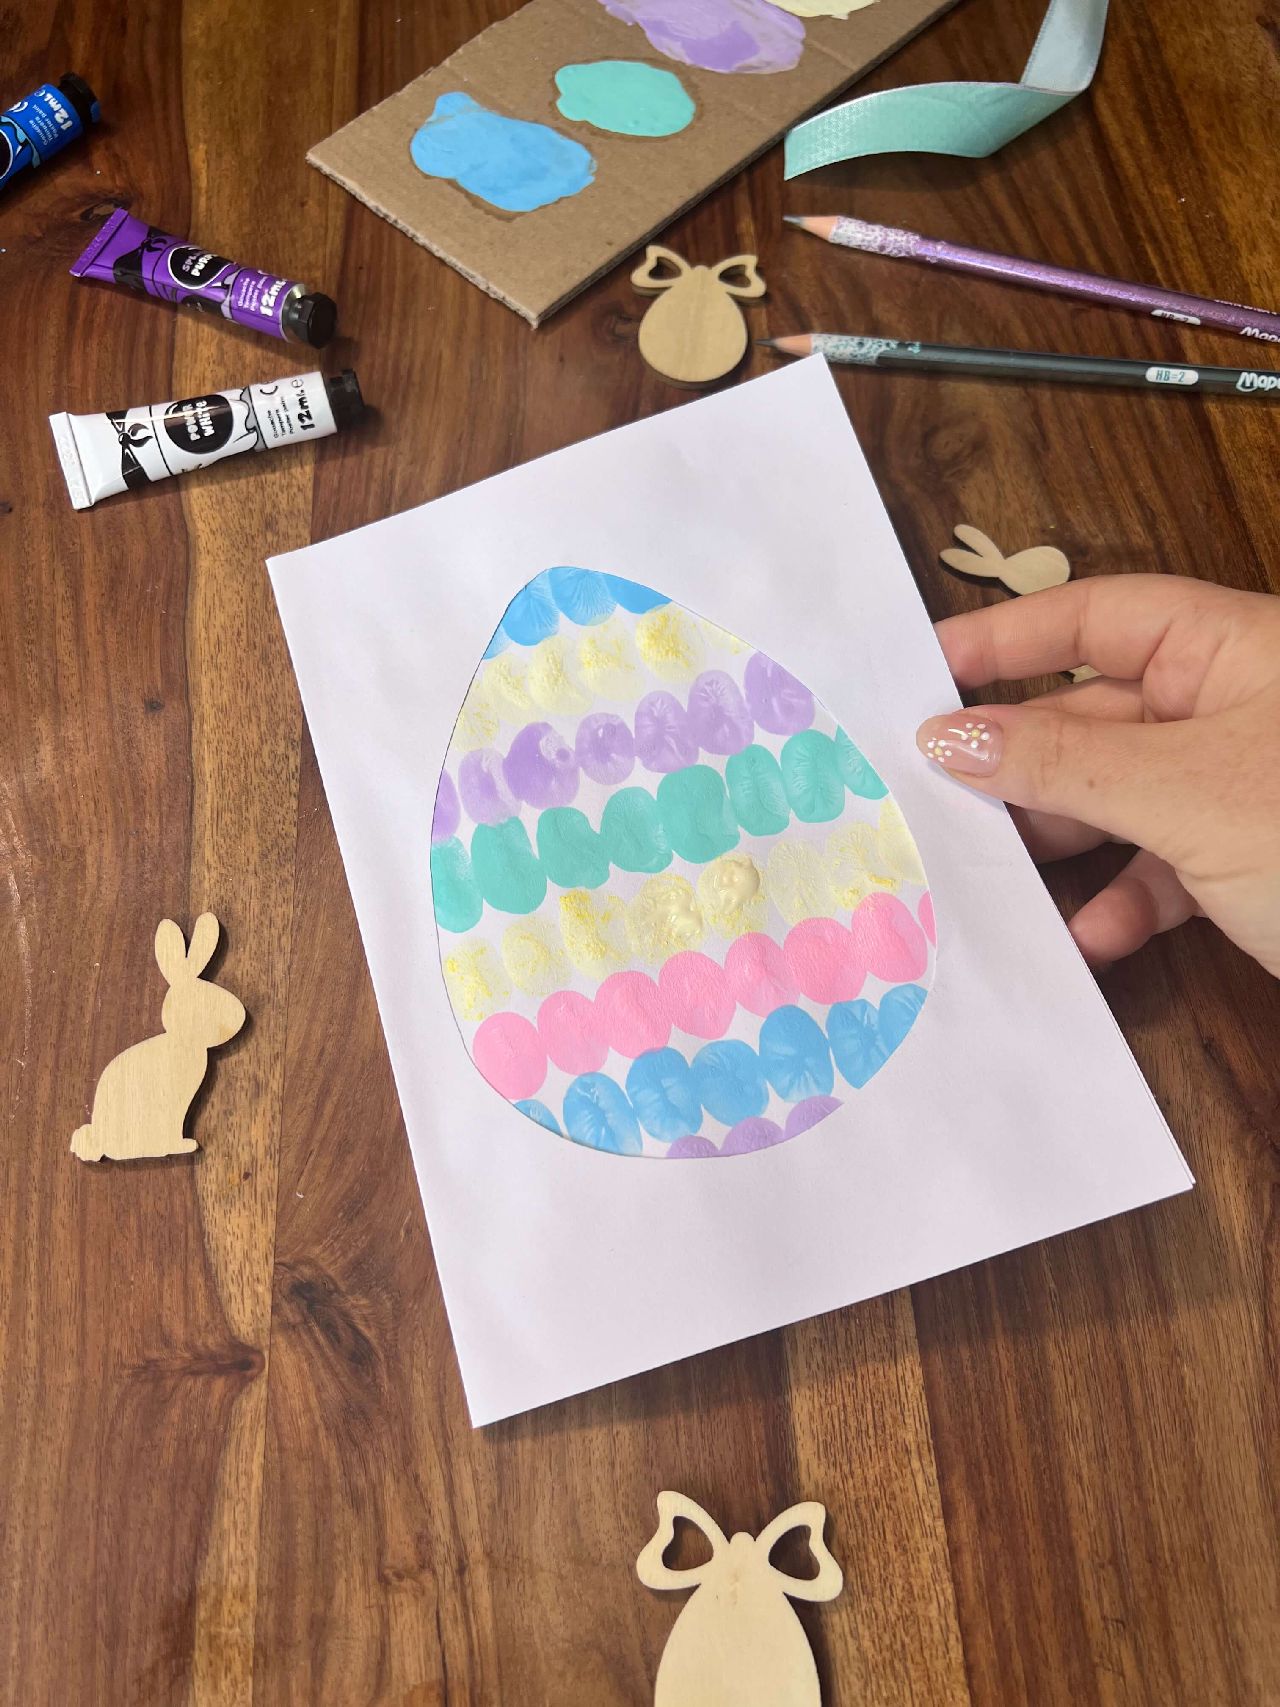 Cut out egg shape with painted design showing through